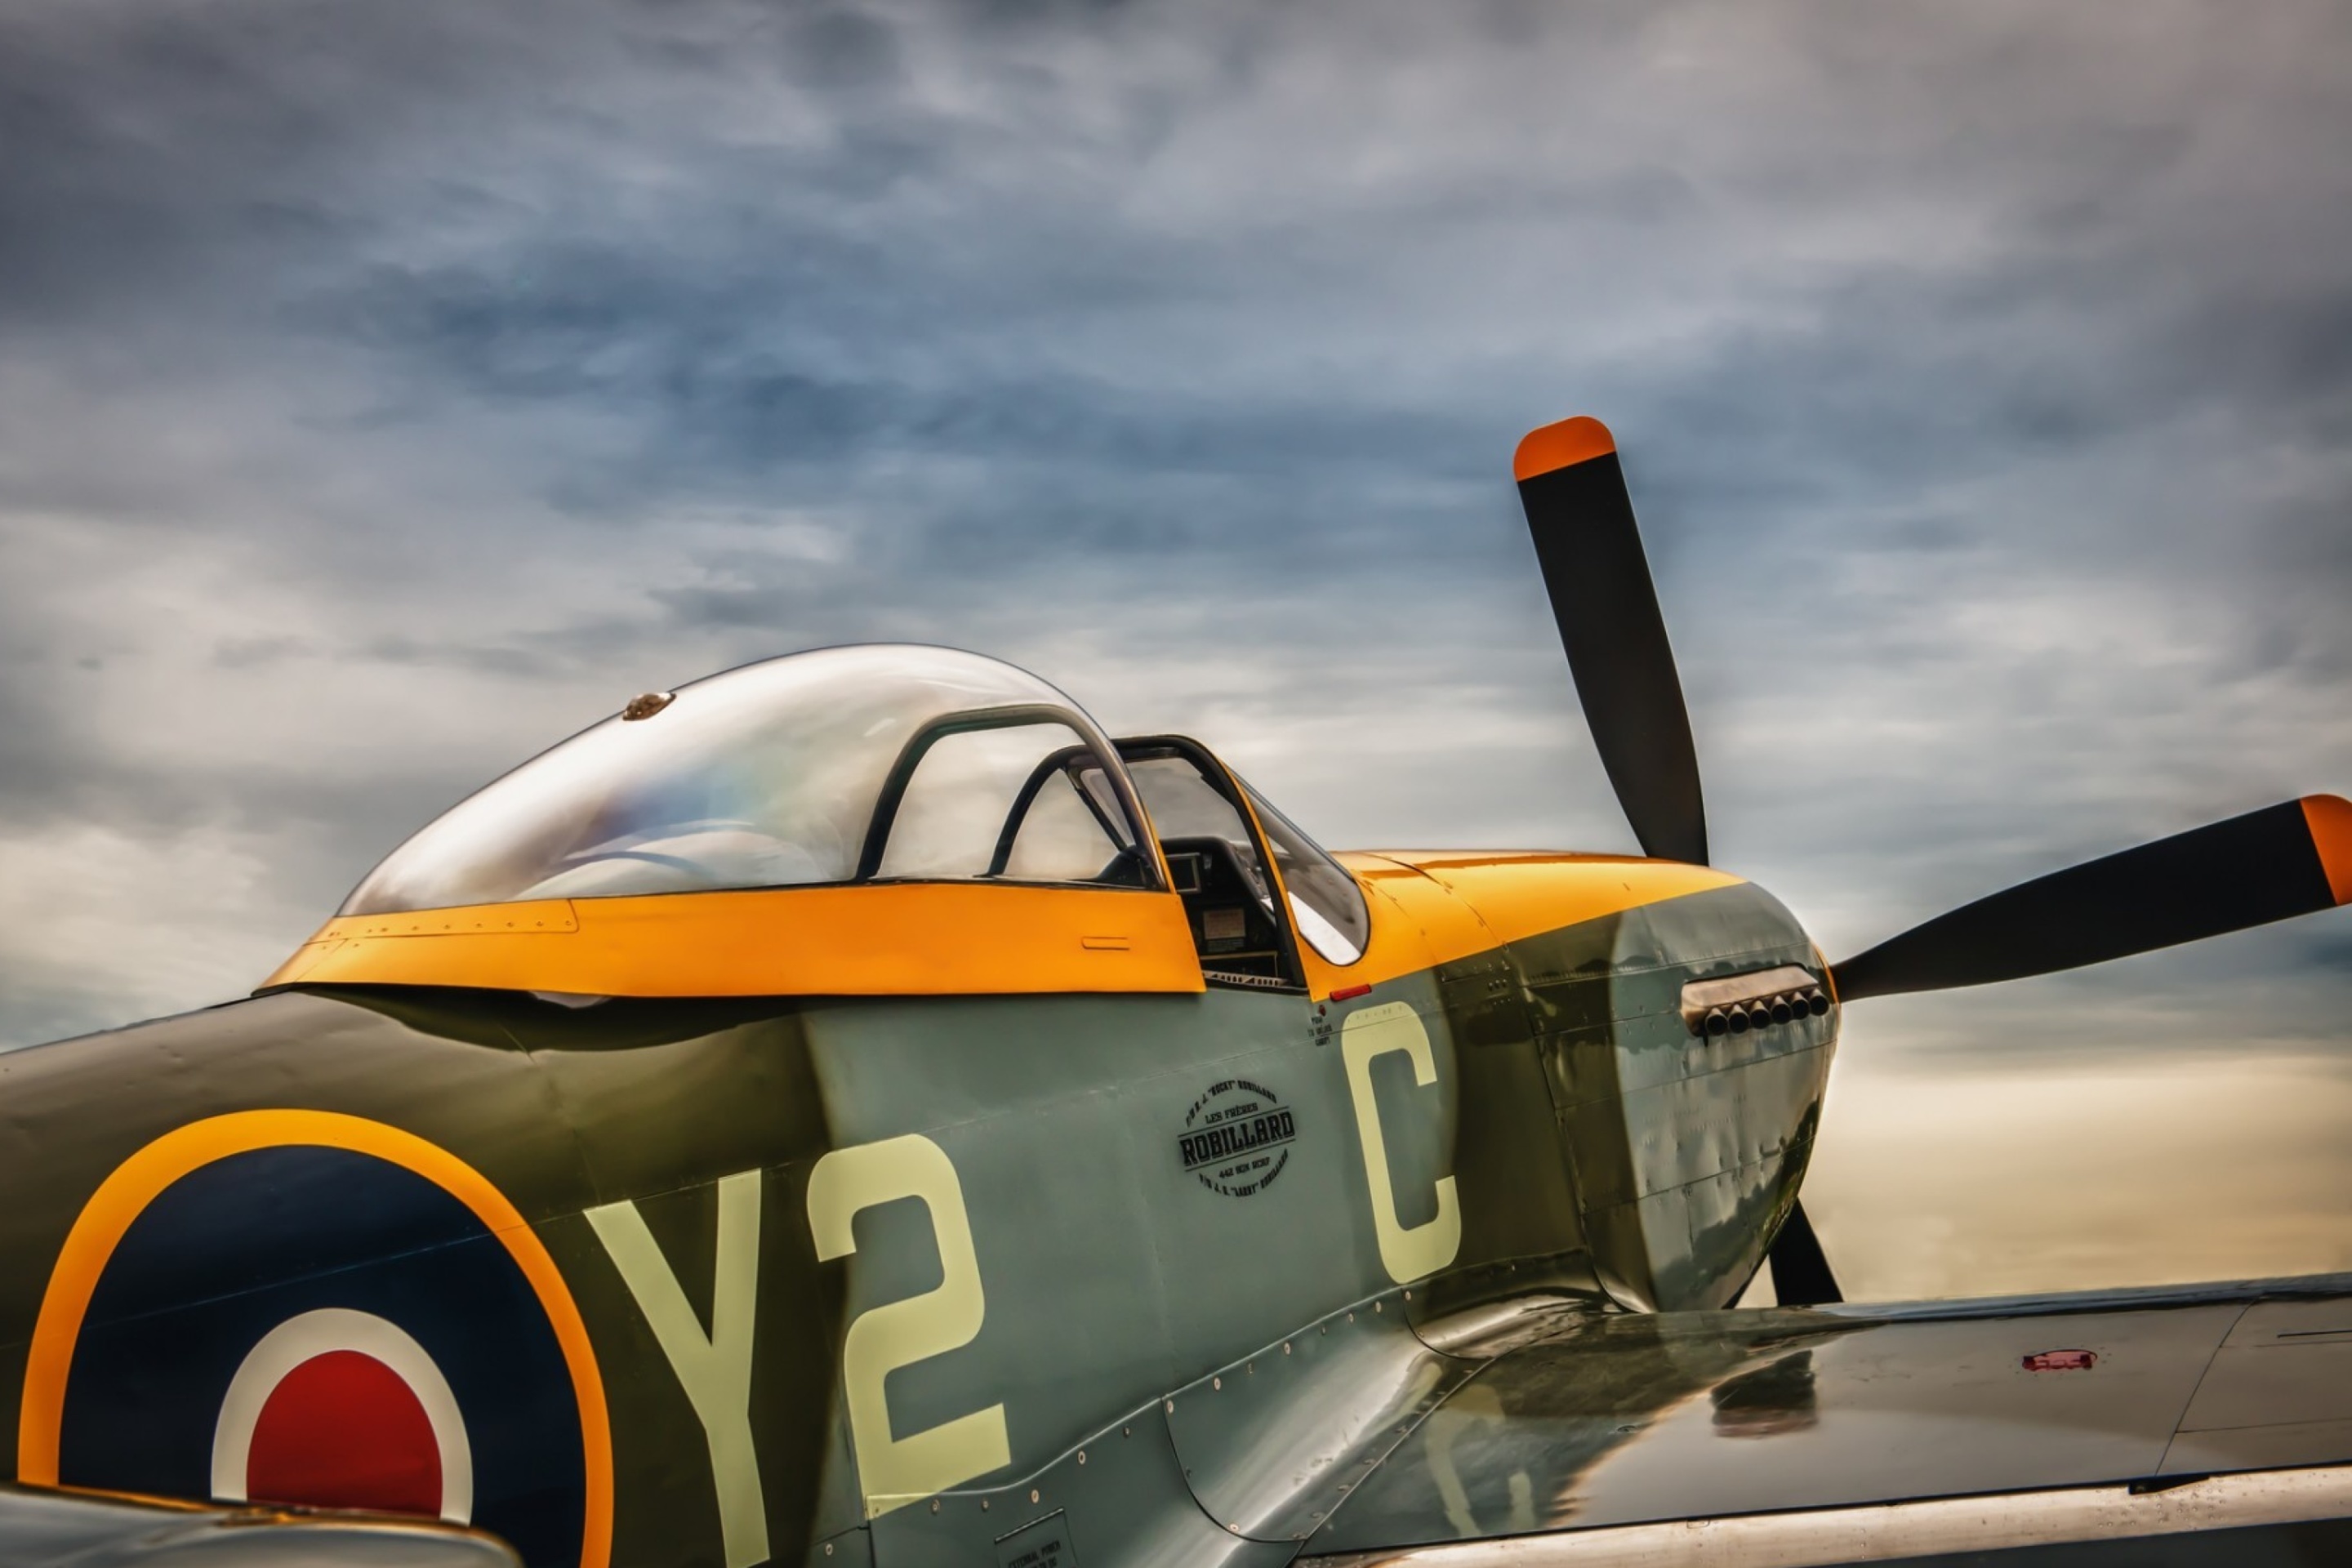 North American P 51 Mustang Air Fighter in World War 2 wallpaper 2880x1920